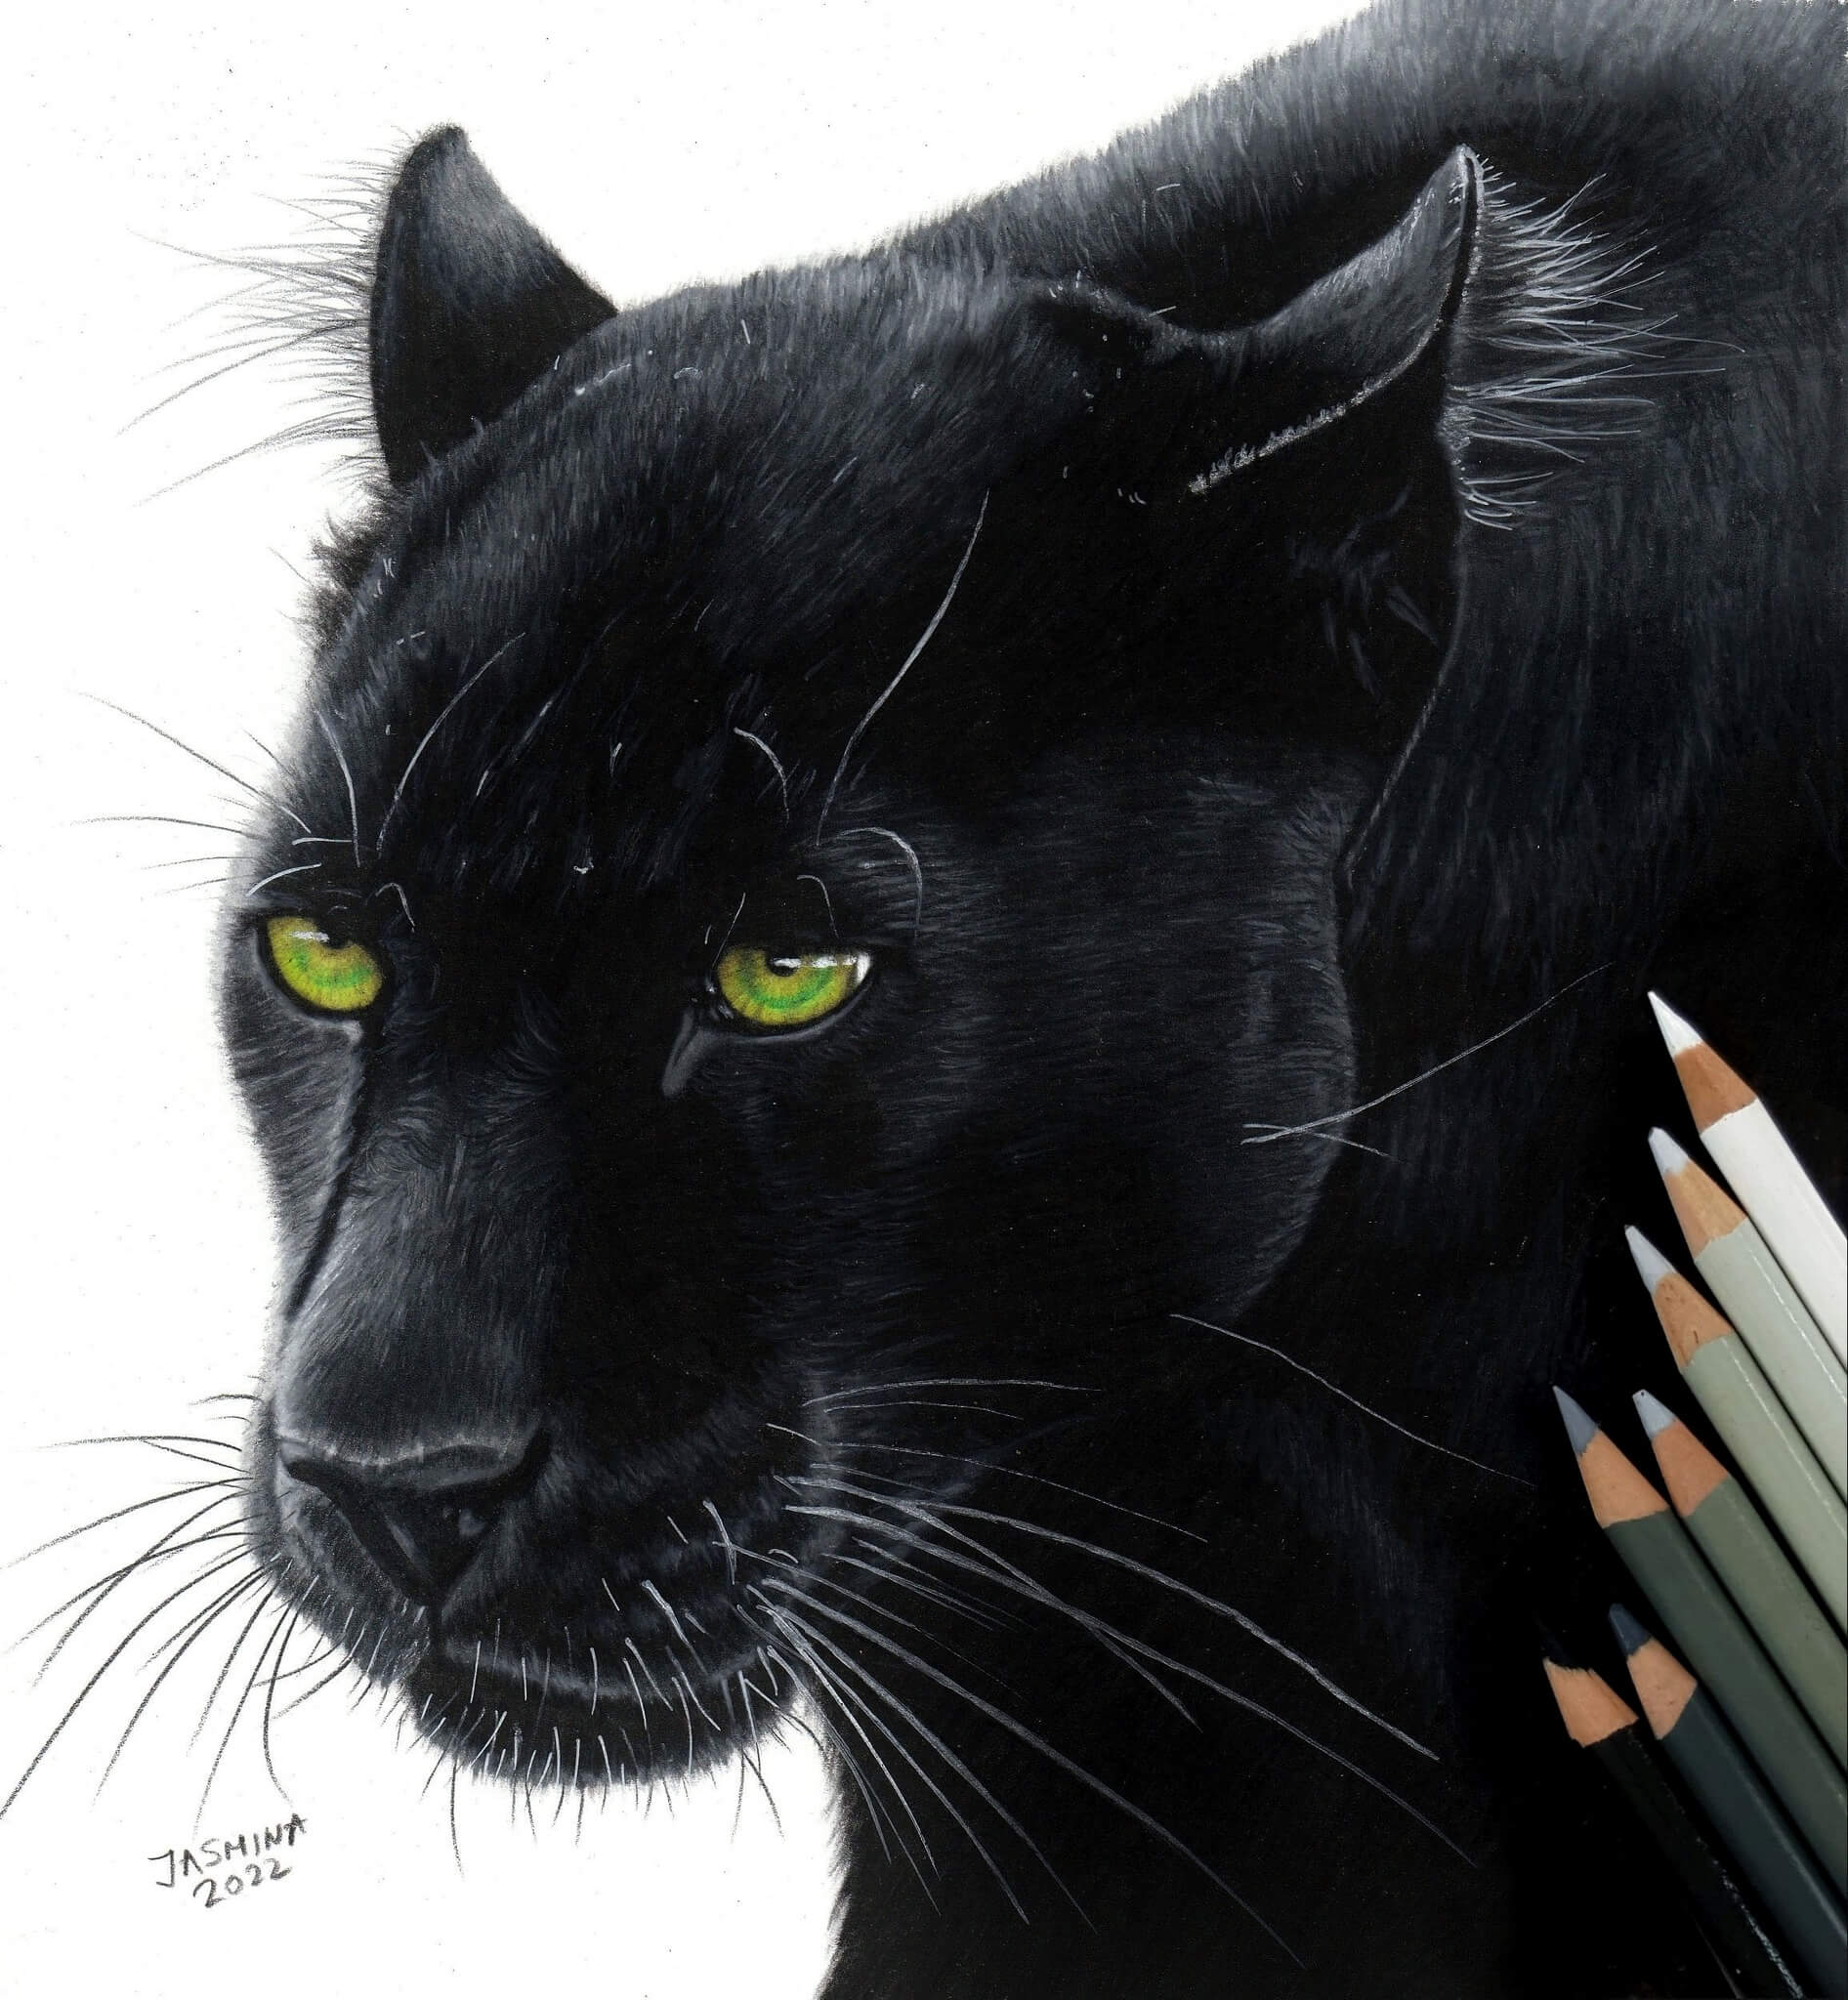 Photorealistic drawing representing a black panther.